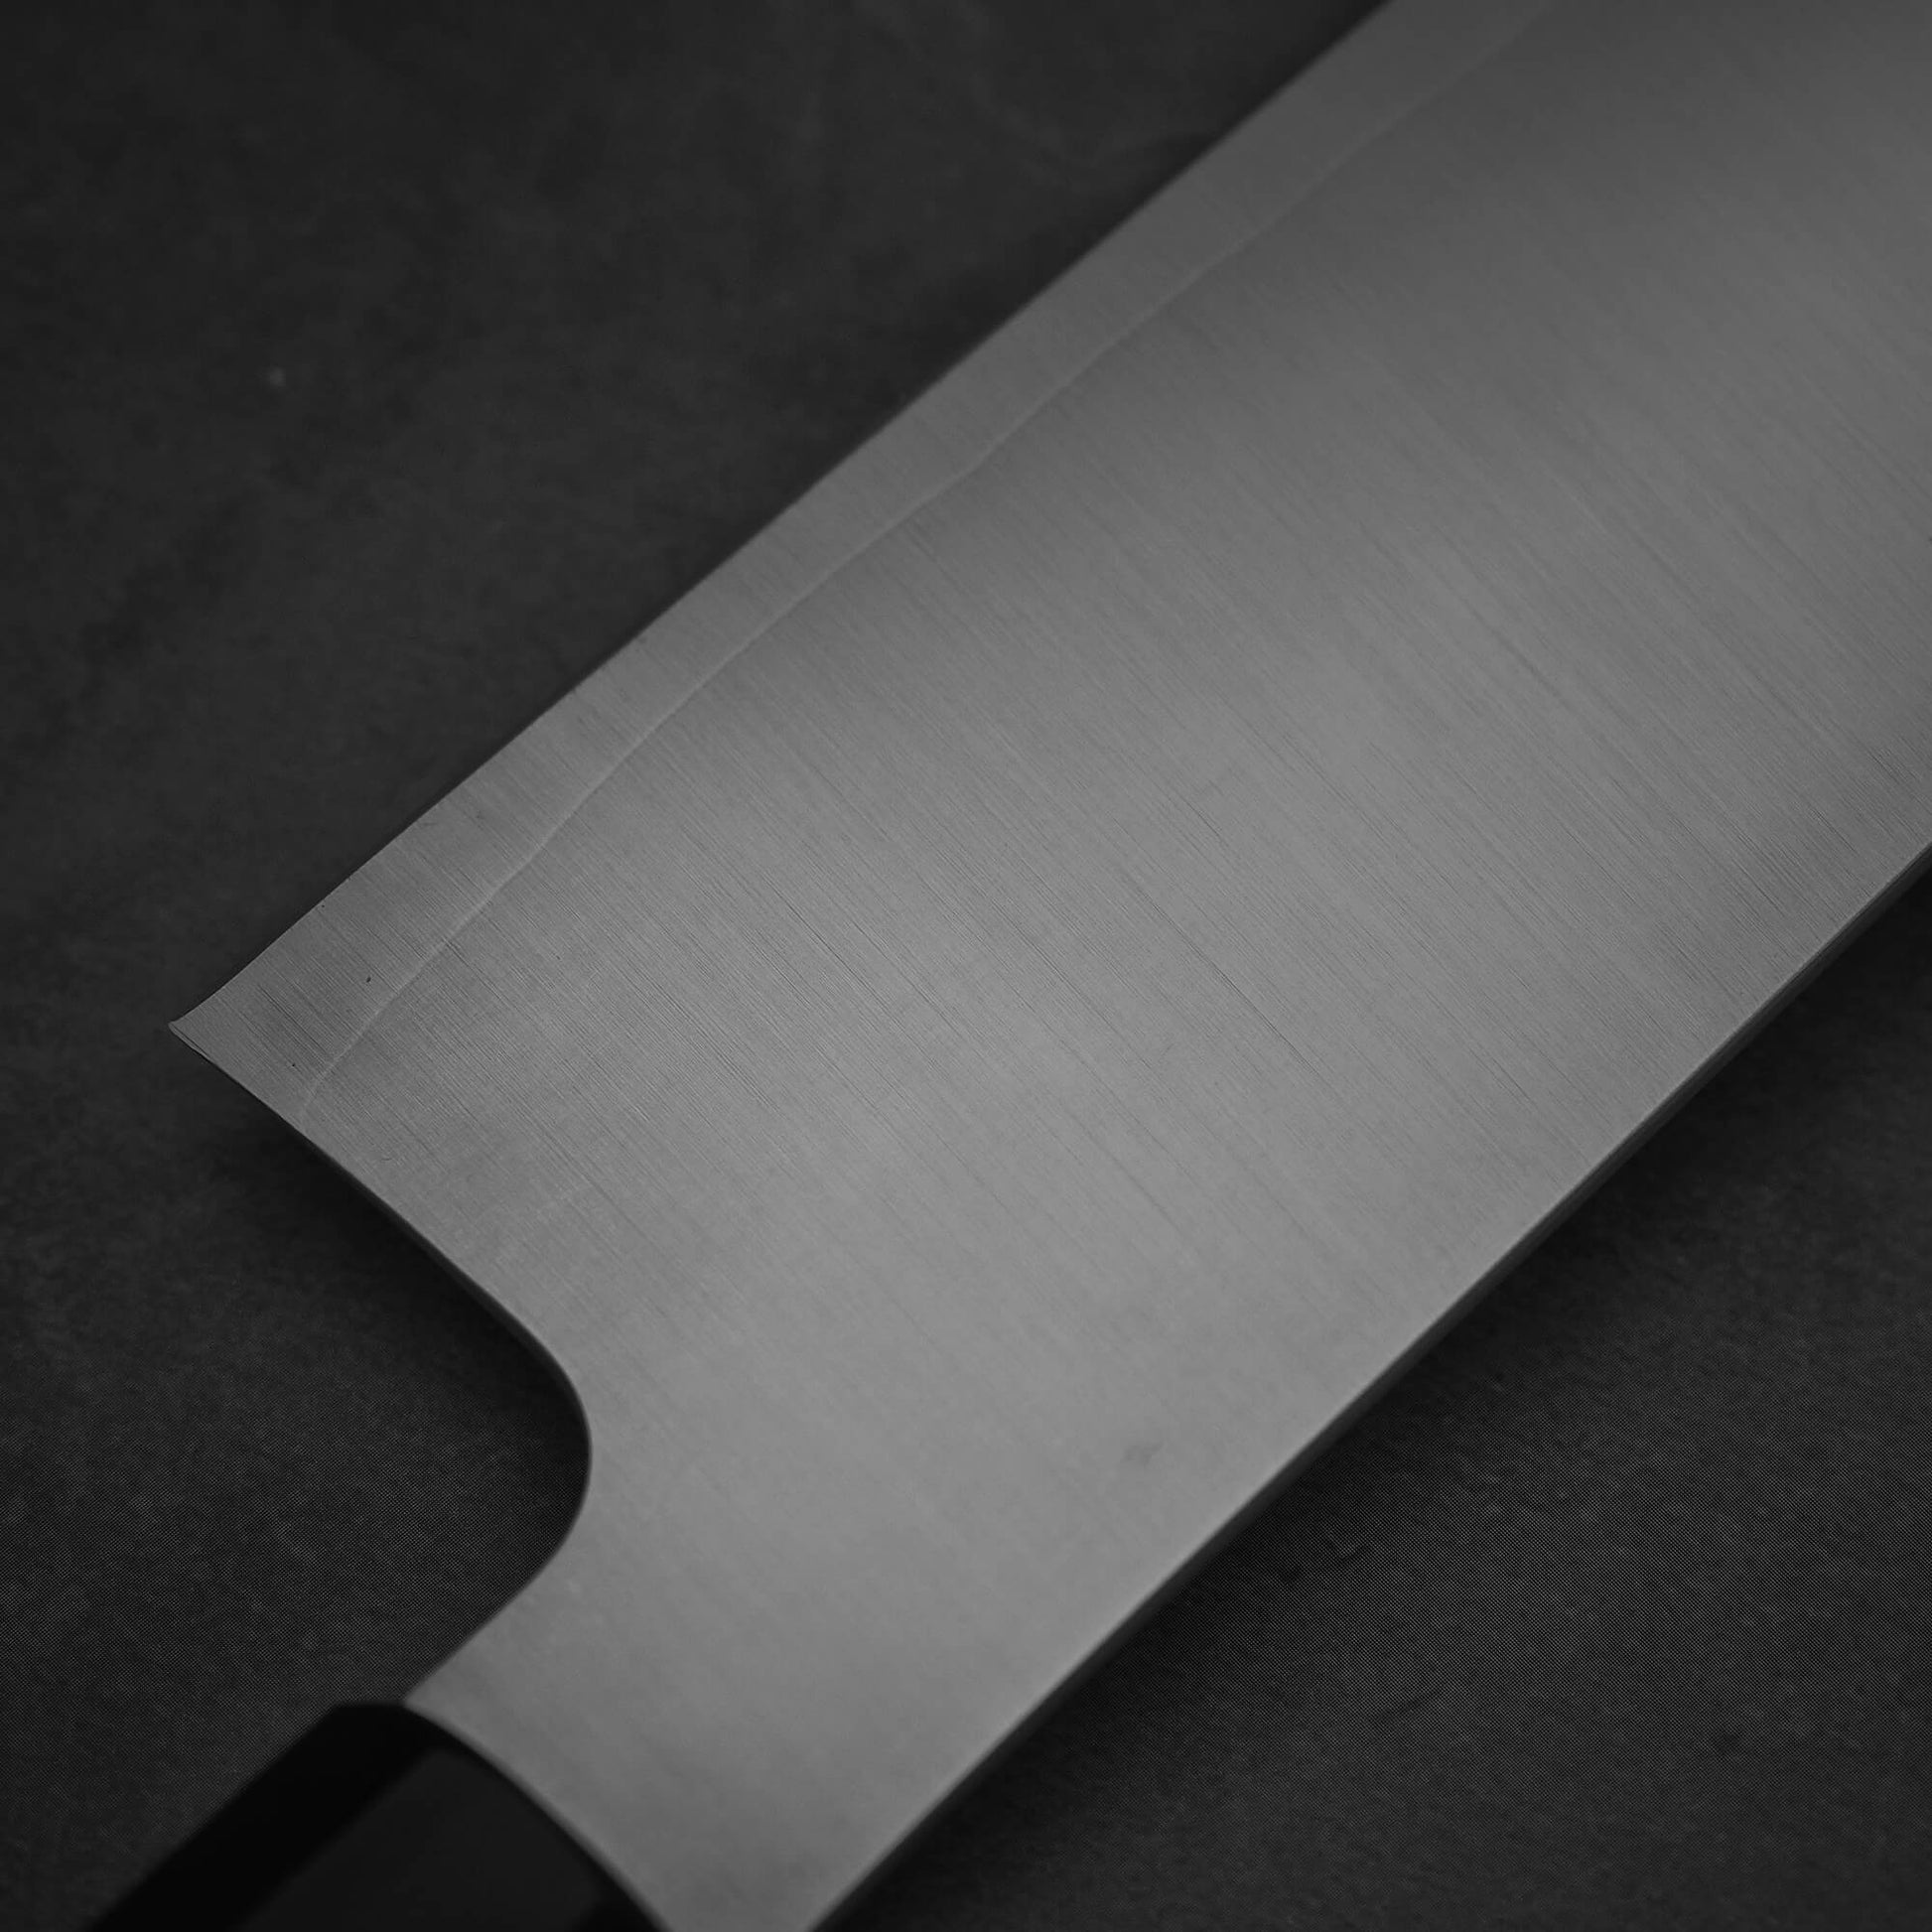 Close up view of Sukenari XEOS gyuto 240mm. Image shows the back side of the knife